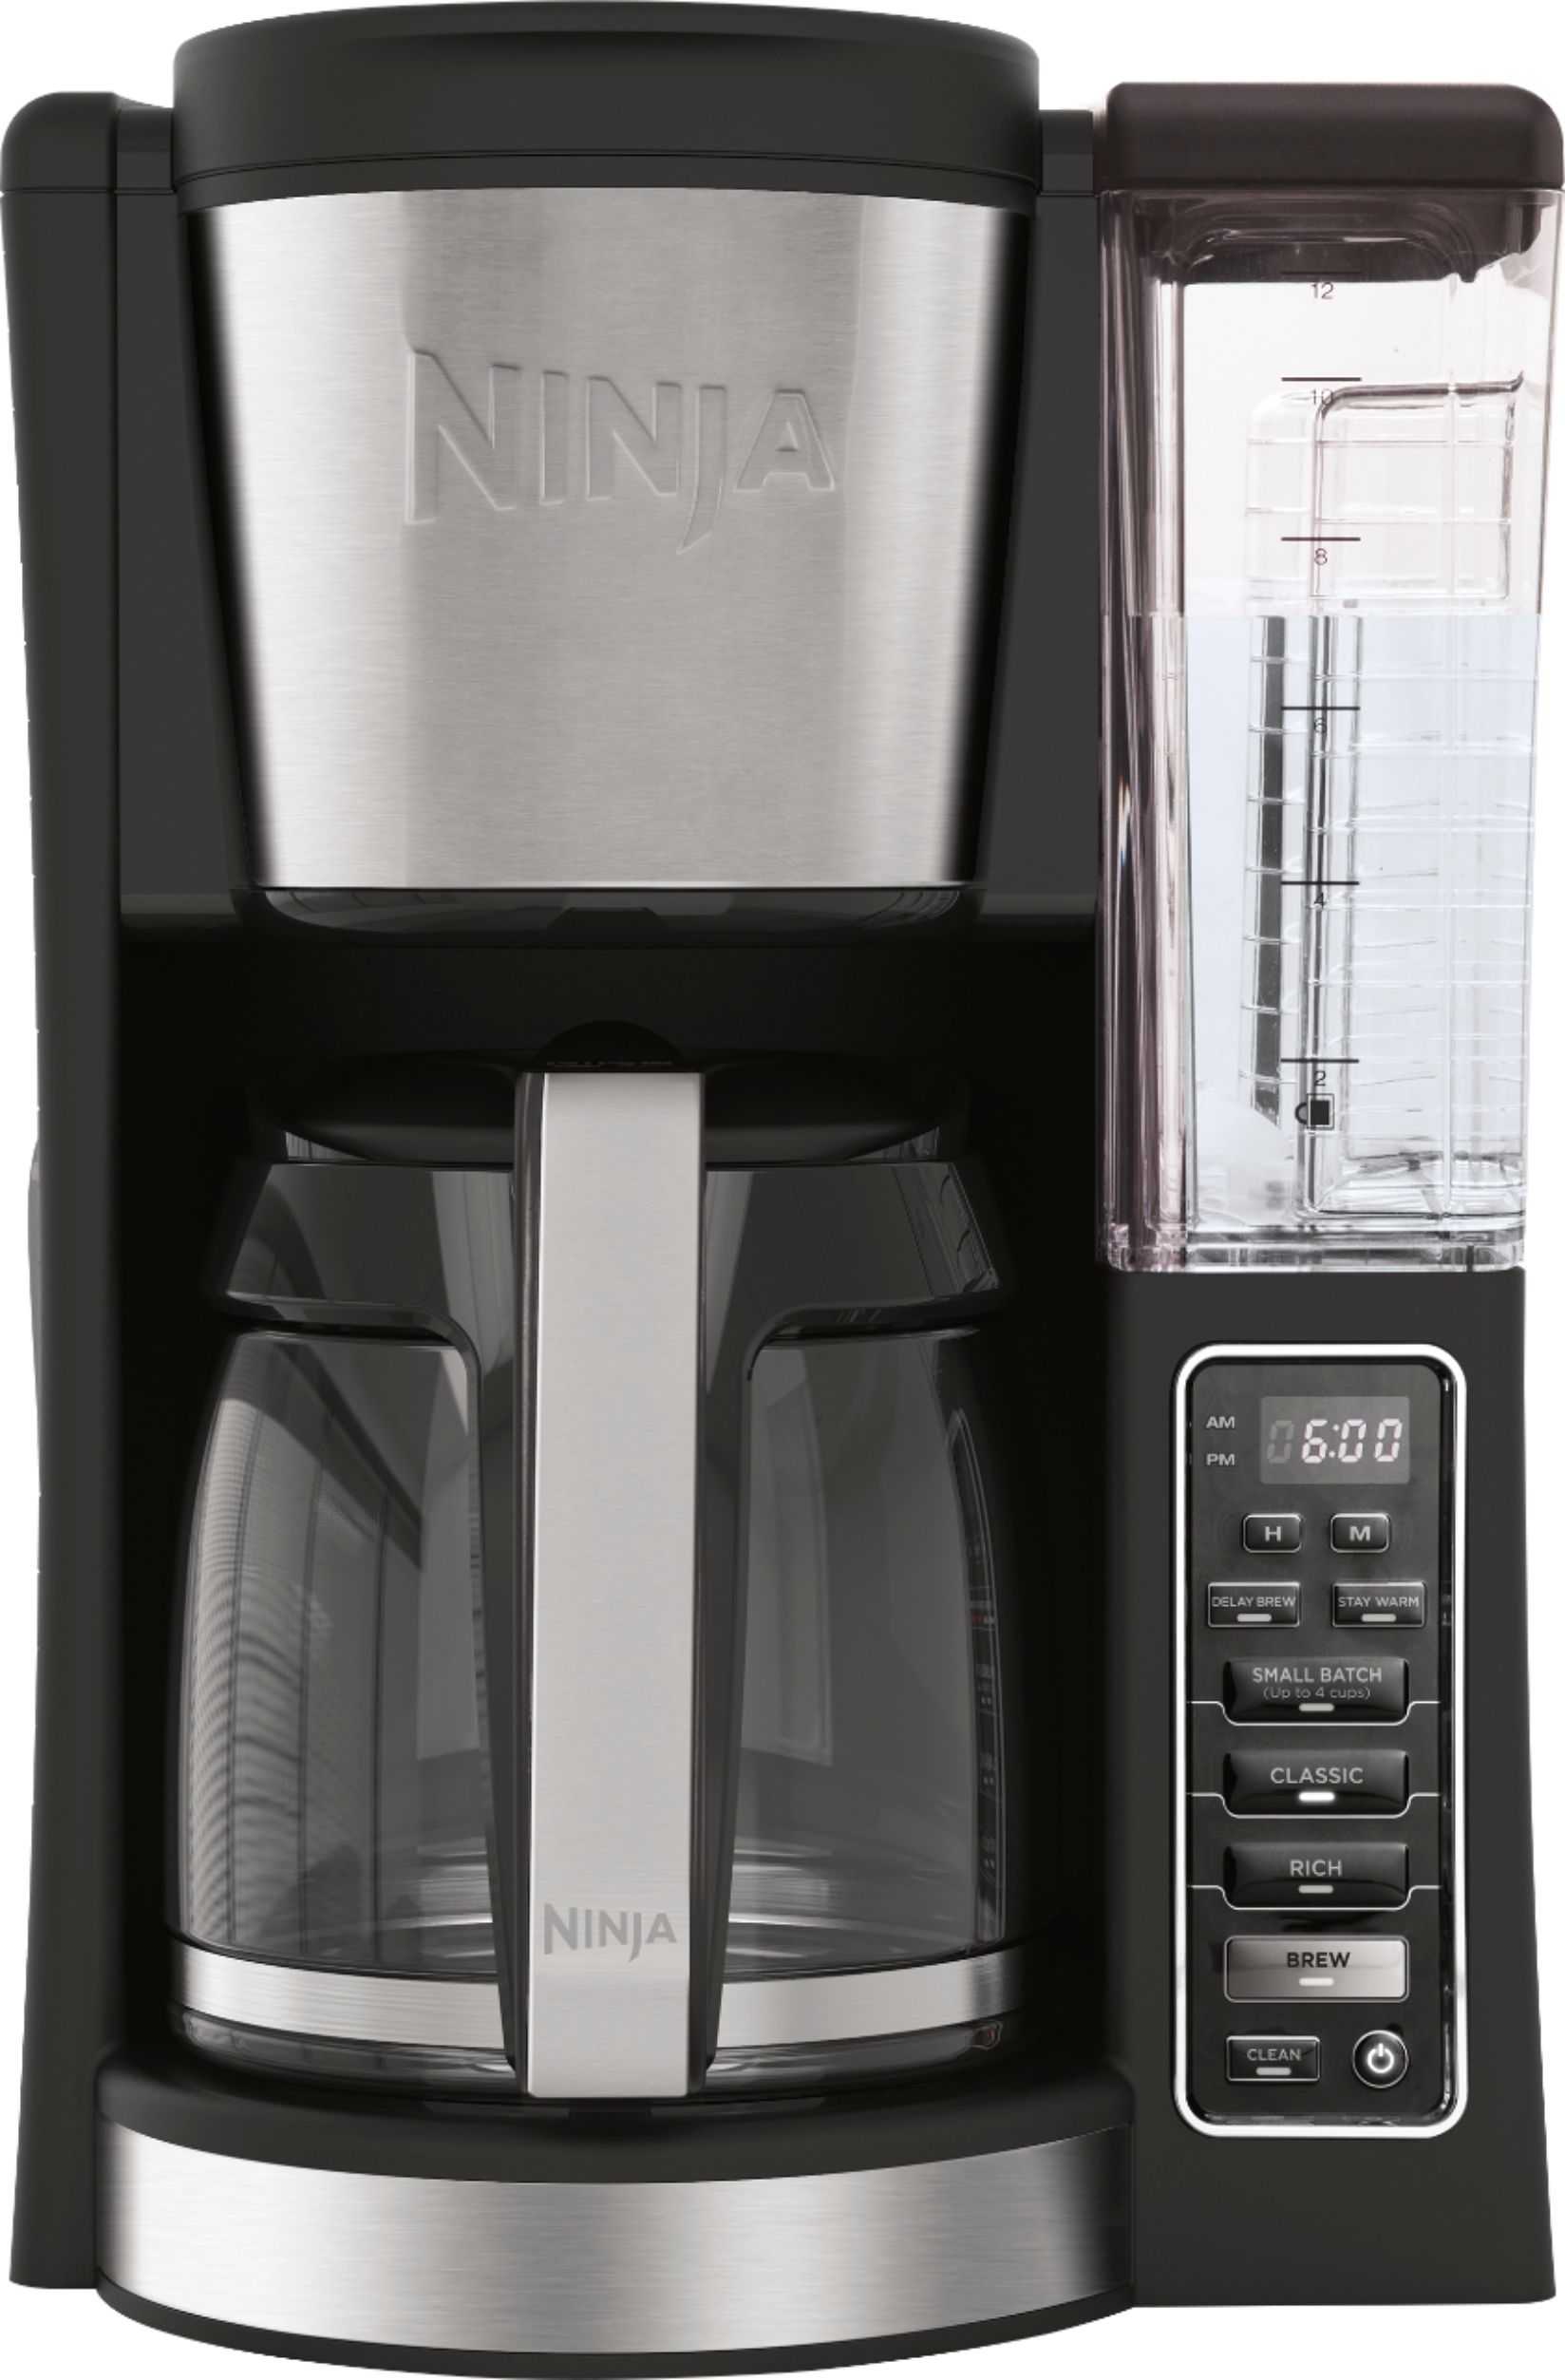 Ninja CE250 12-Cup Programmable Coffee Maker, Glass Carafe, Stainless Steel